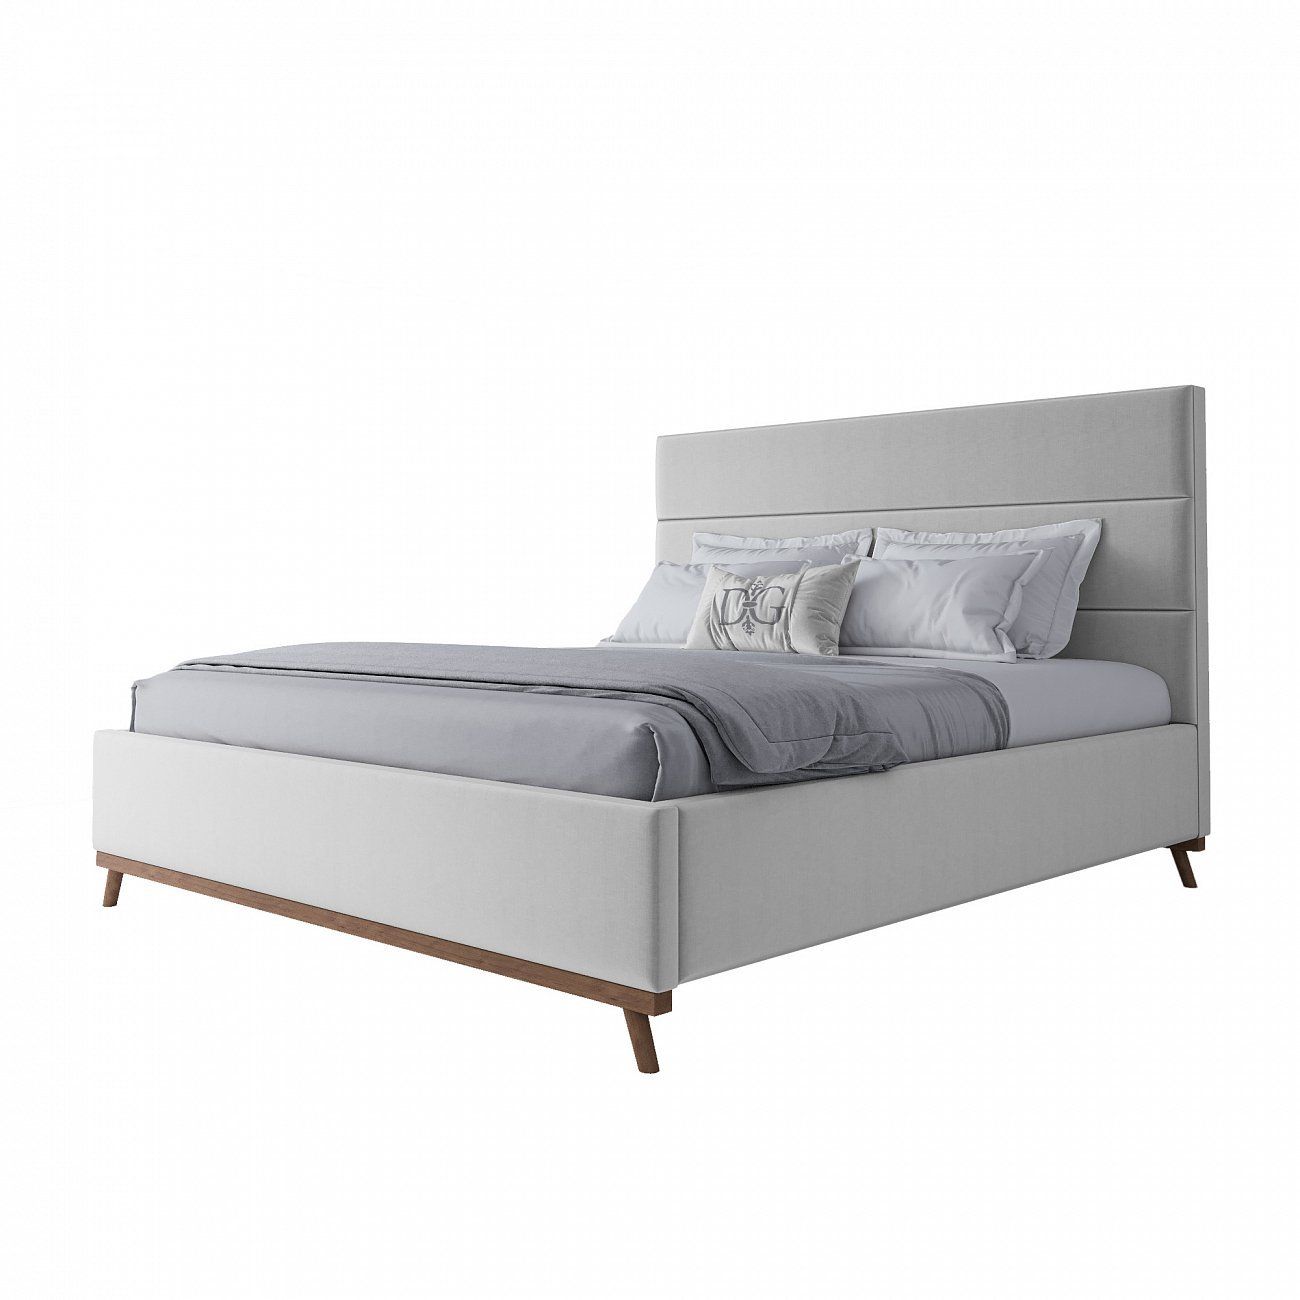 Double bed 180x200 white Cooper Snowfall